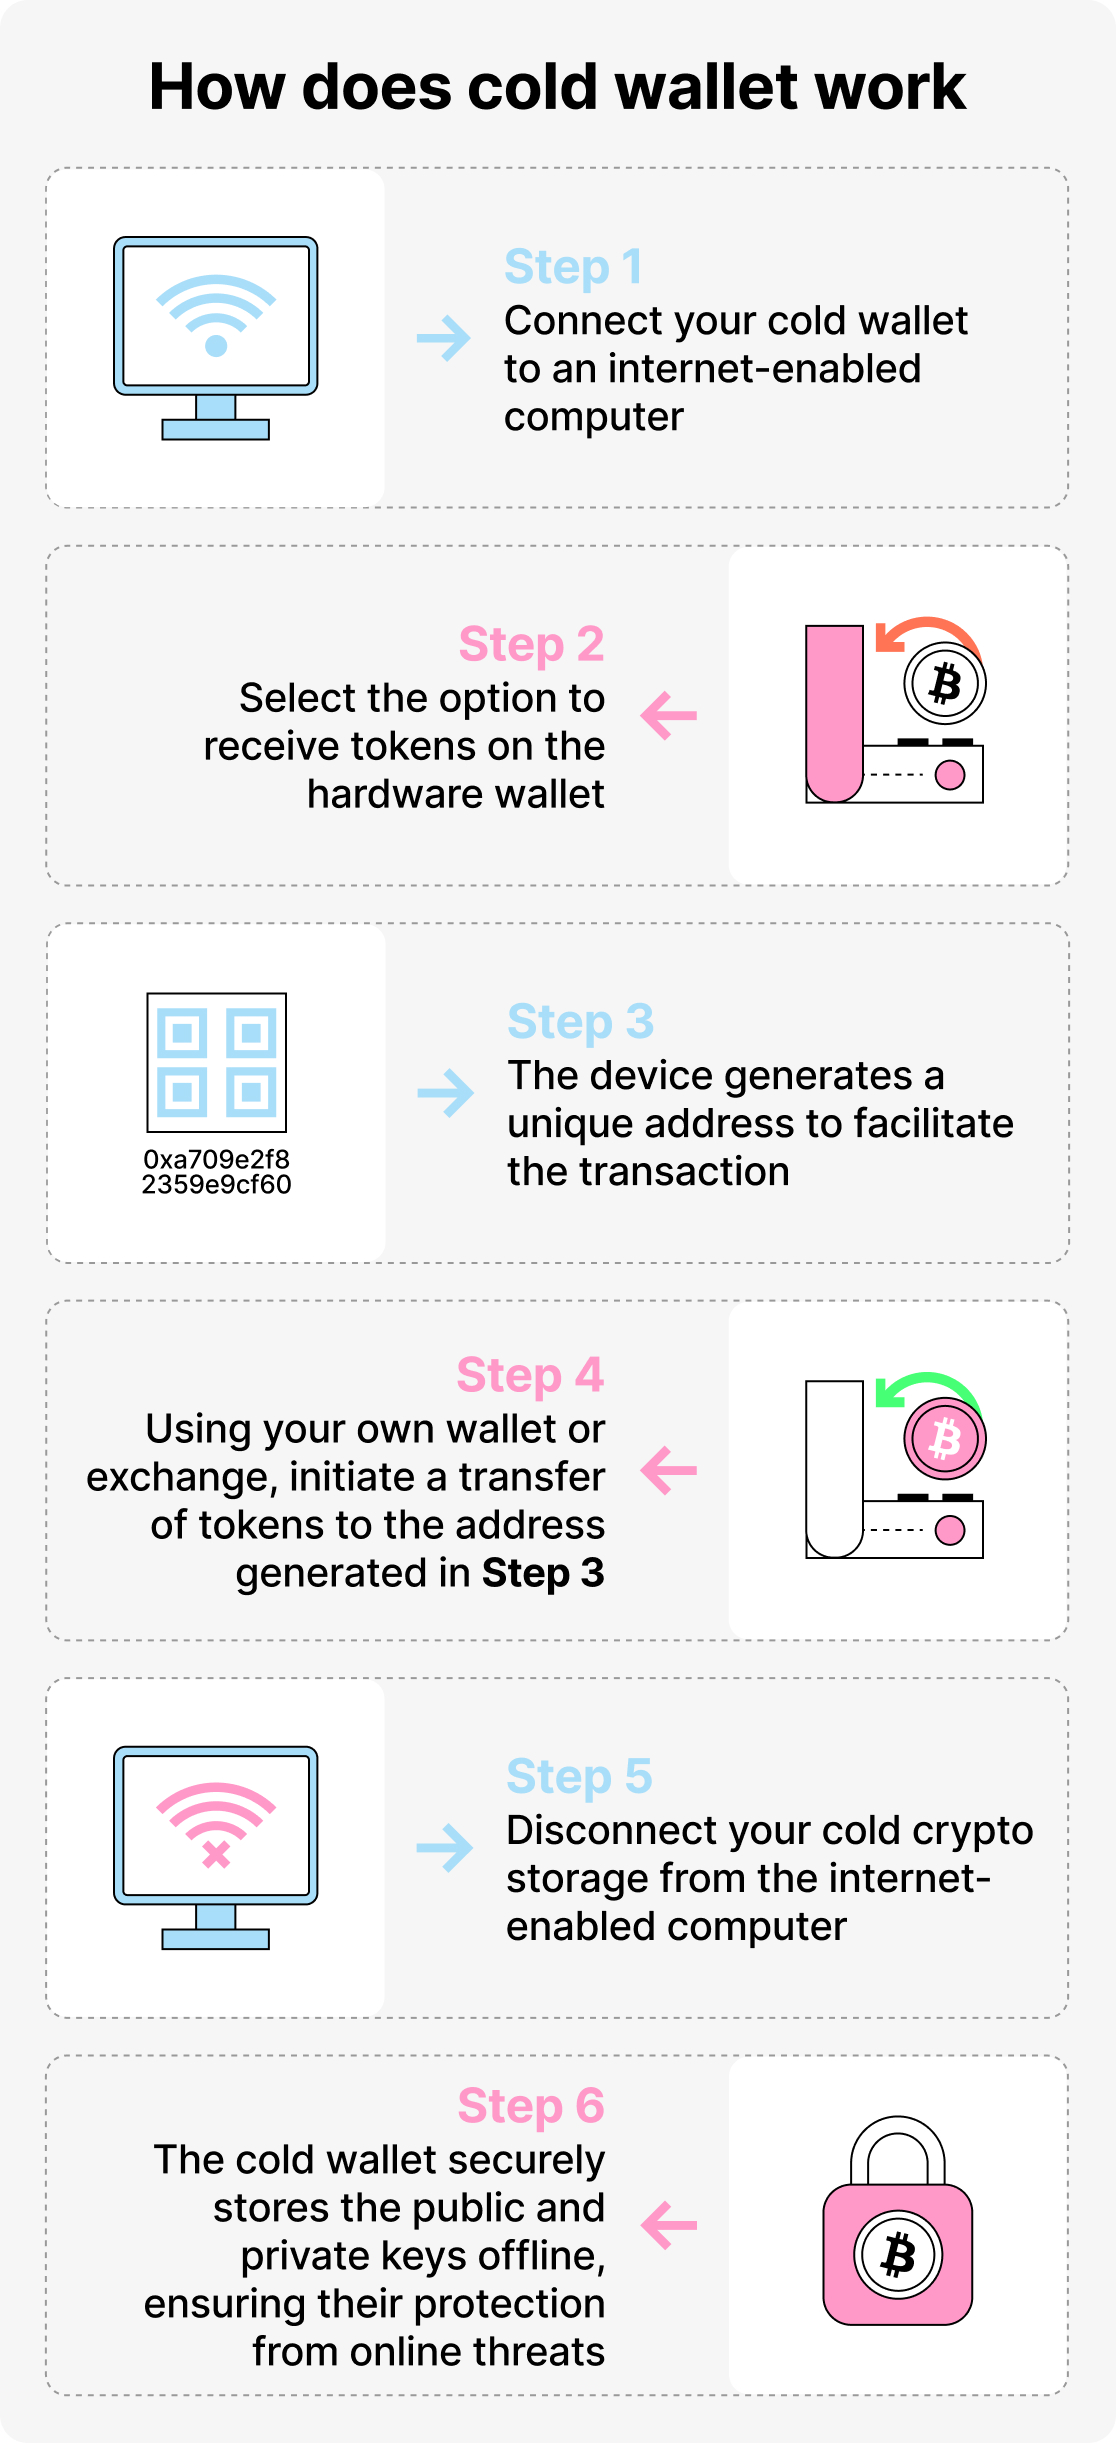 how cold wallets work info